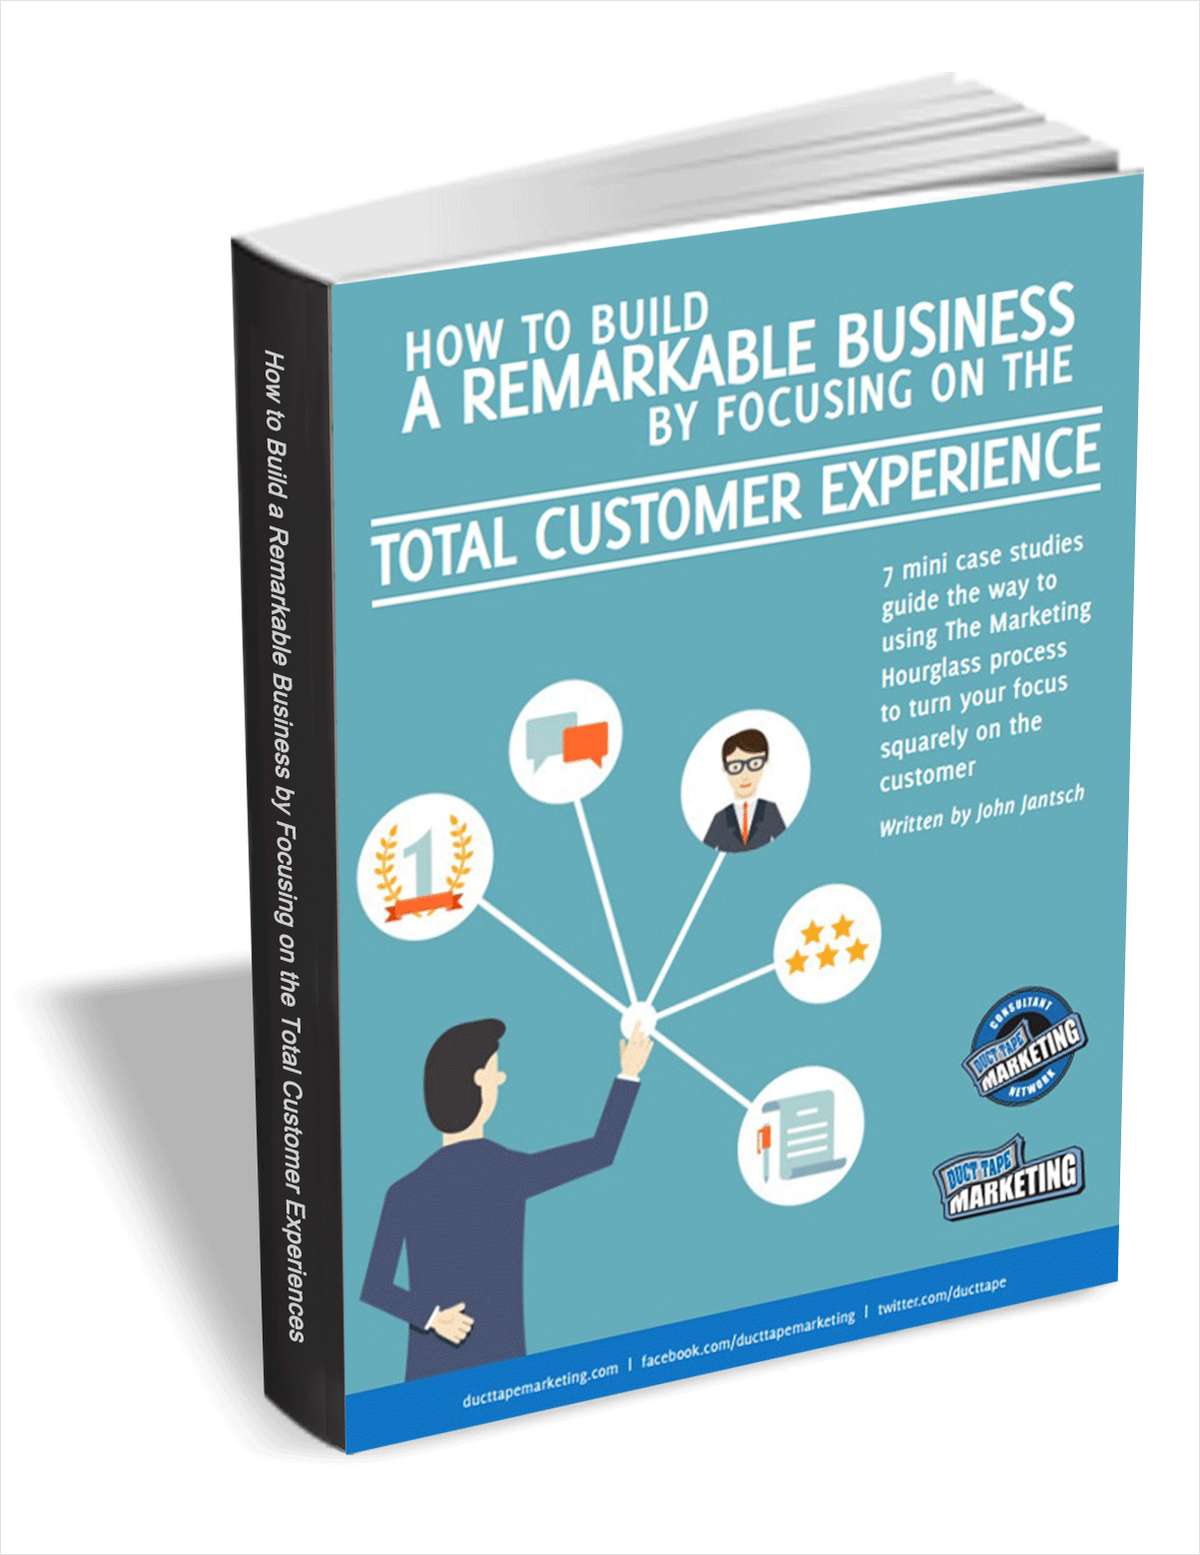 How to Build a Remarkable Business by Focusing on the Total Customer Experience